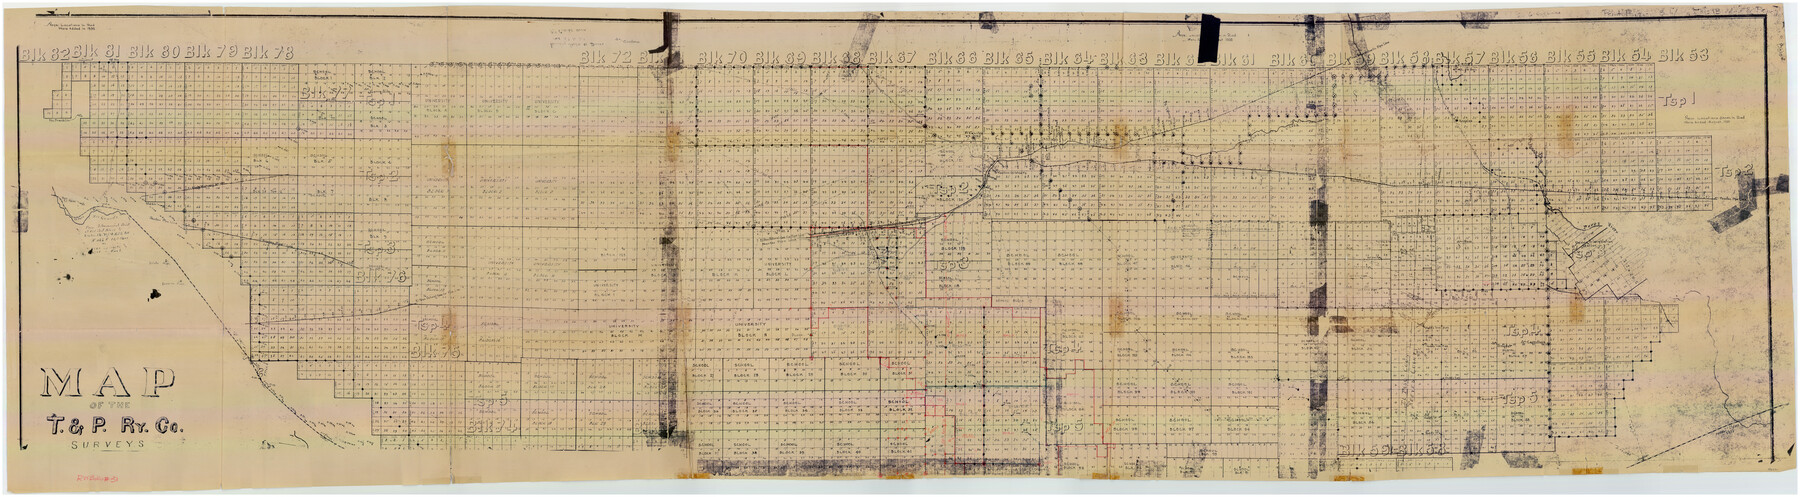 89622, [Index map of T. & P. Ry. Company’s 80-mile Trans-Pecos Reserve’s perpetuated corners - North Part], General Map Collection